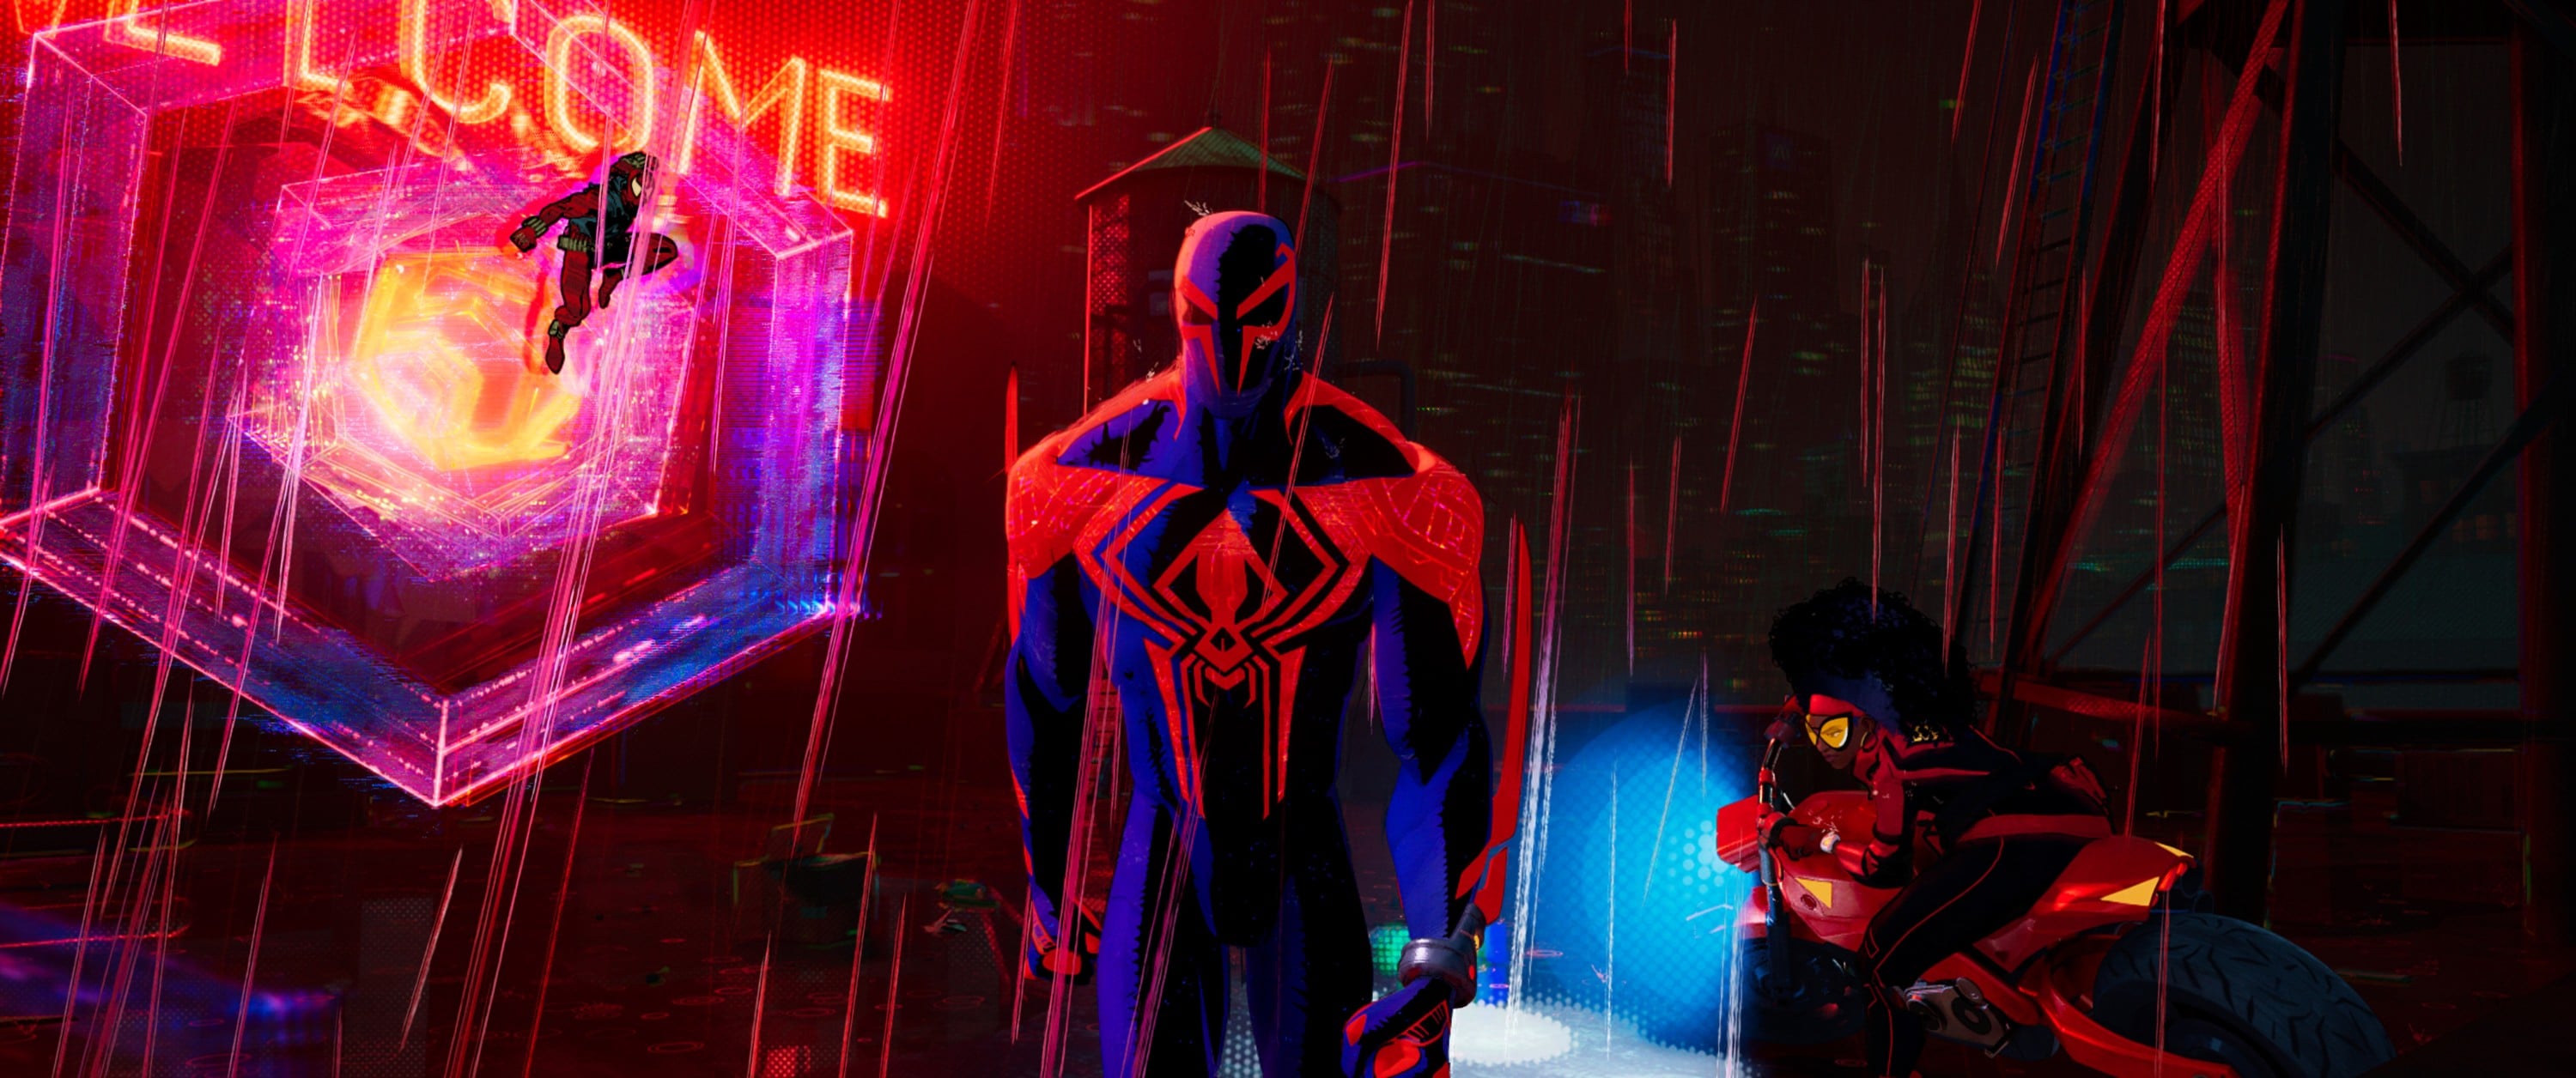 Spider-Verse' Stars Who Also Played Live-Action Marvel Characters